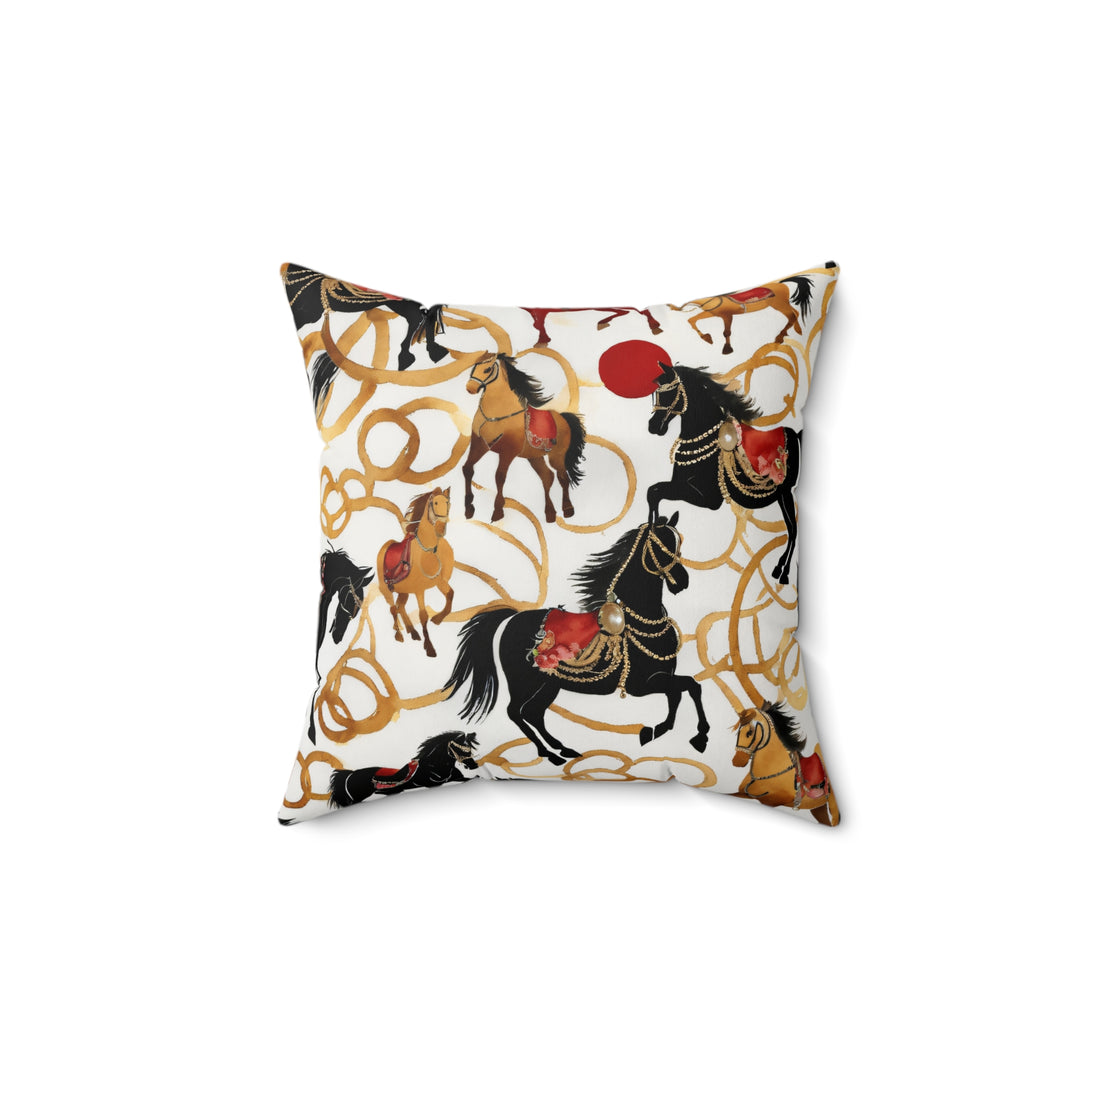 Elegant Designer Inspired Pillow With Horses and Chainlink from Yumigara